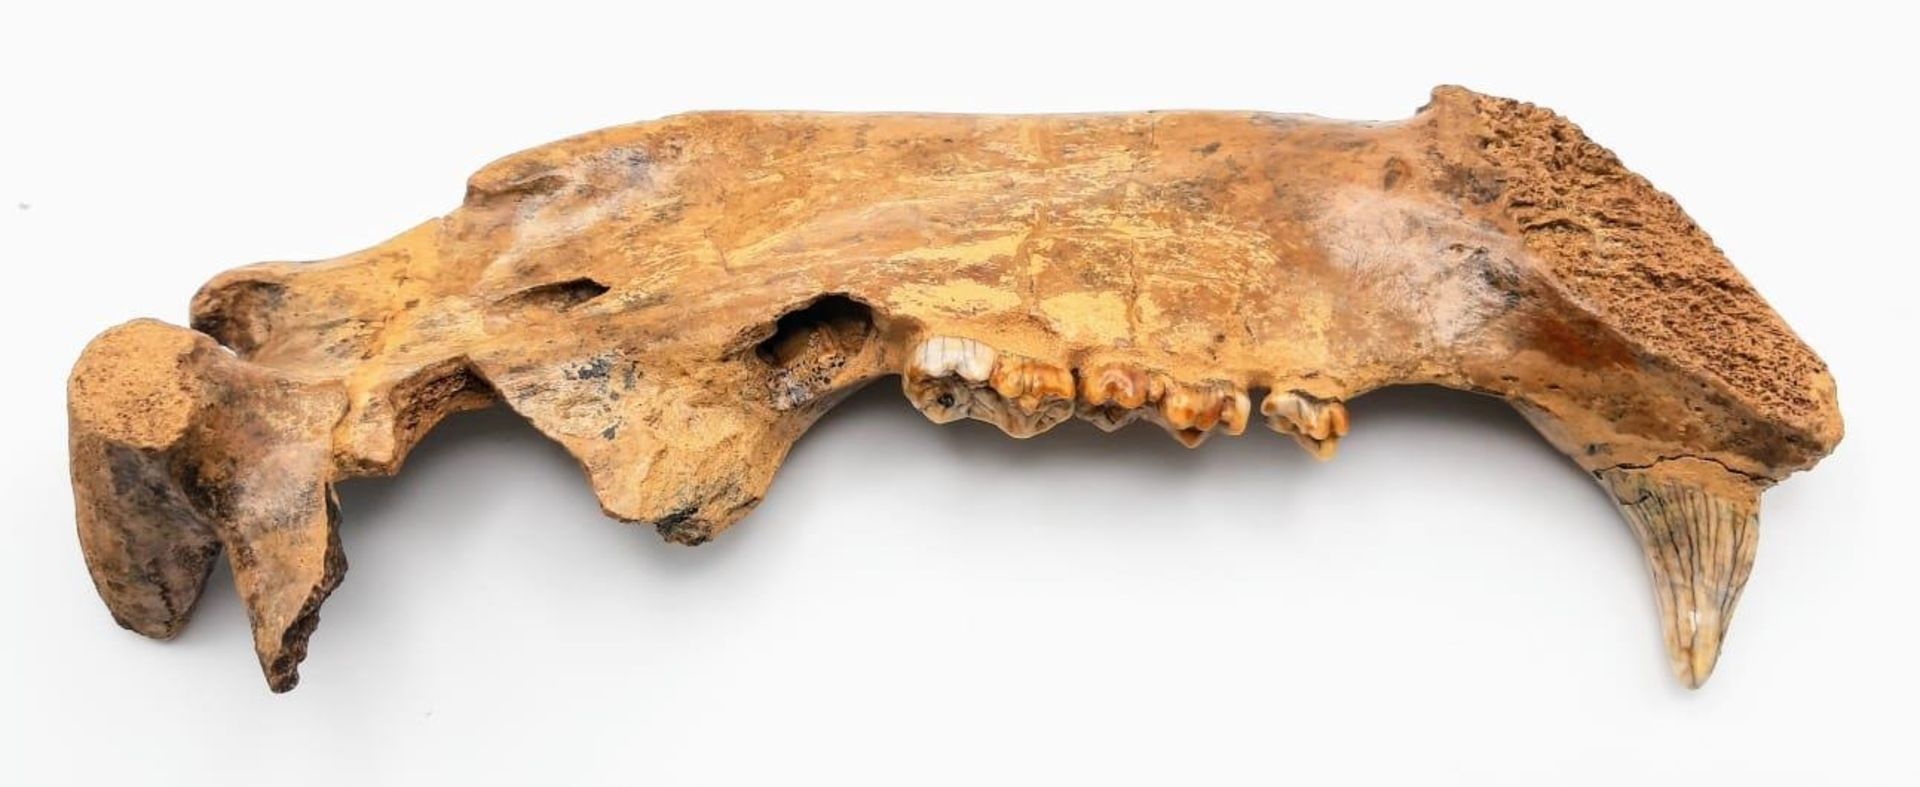 A spectacular, jaw with teeth of Ursus spelaeus (Cave bear), a prehistoric species that lived in - Image 2 of 4